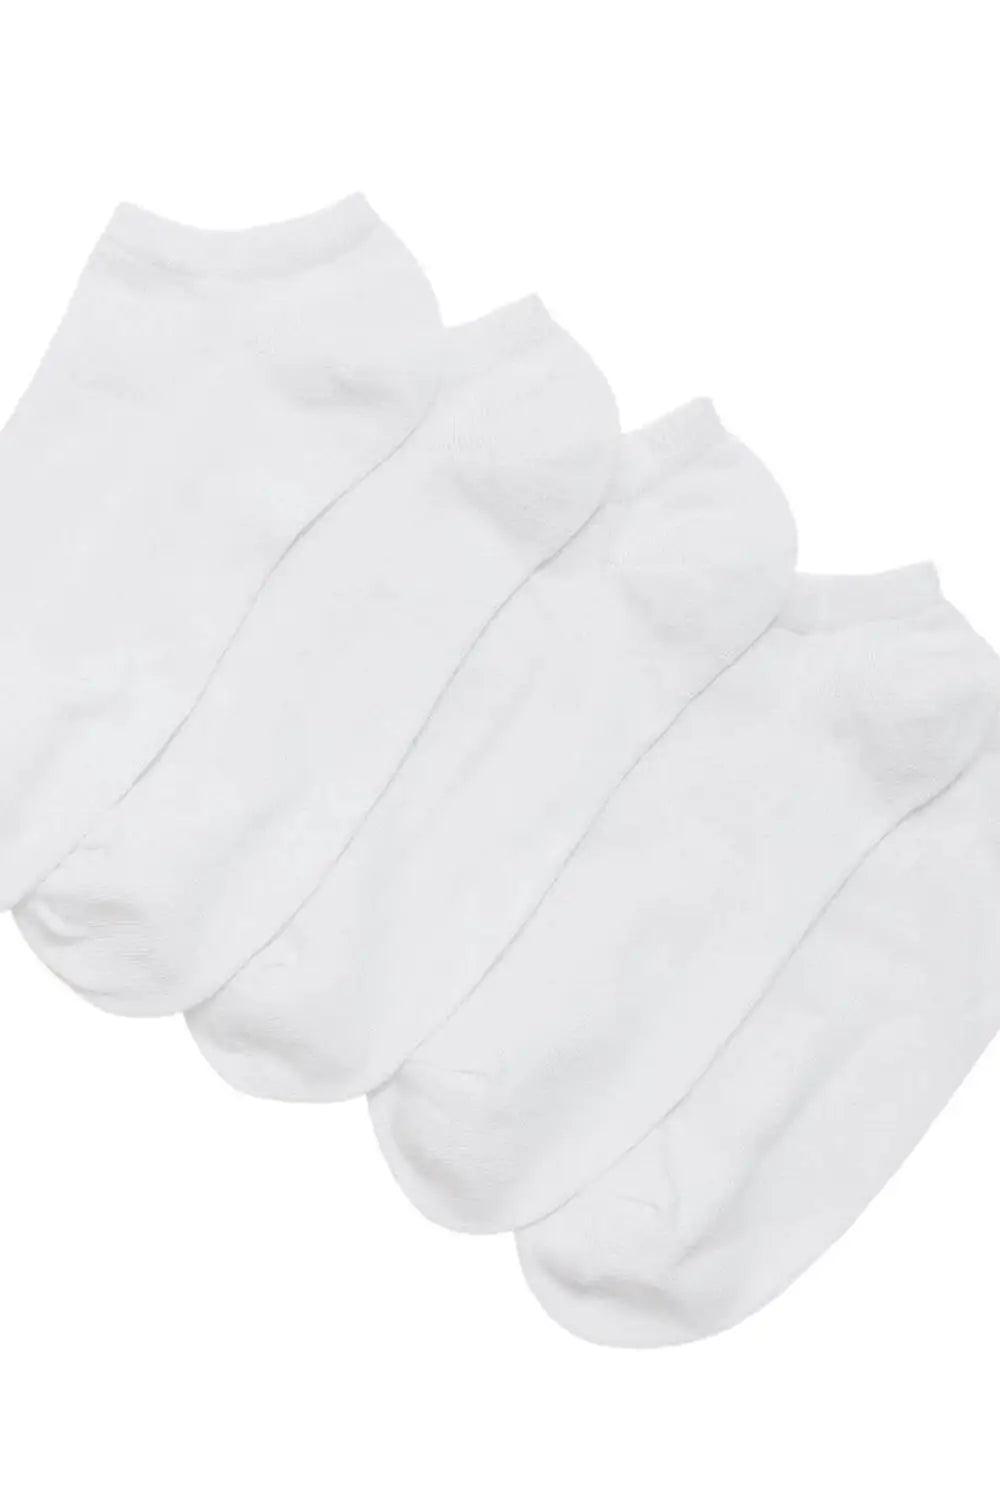 M&S Trainer Liners Socks 5 Pack